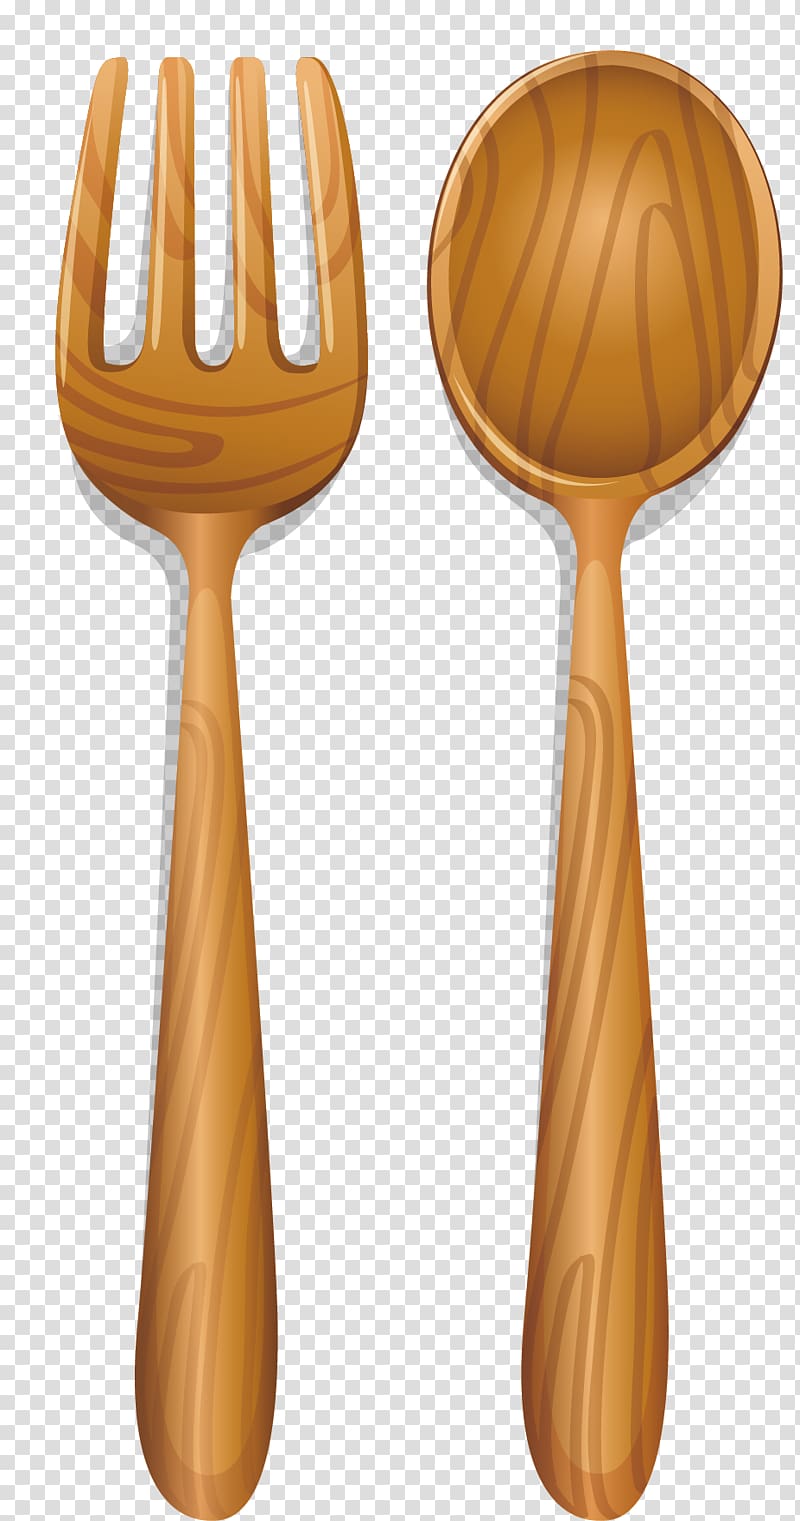 Knife Fork Wooden spoon, Wooden spoon transparent background PNG clipart